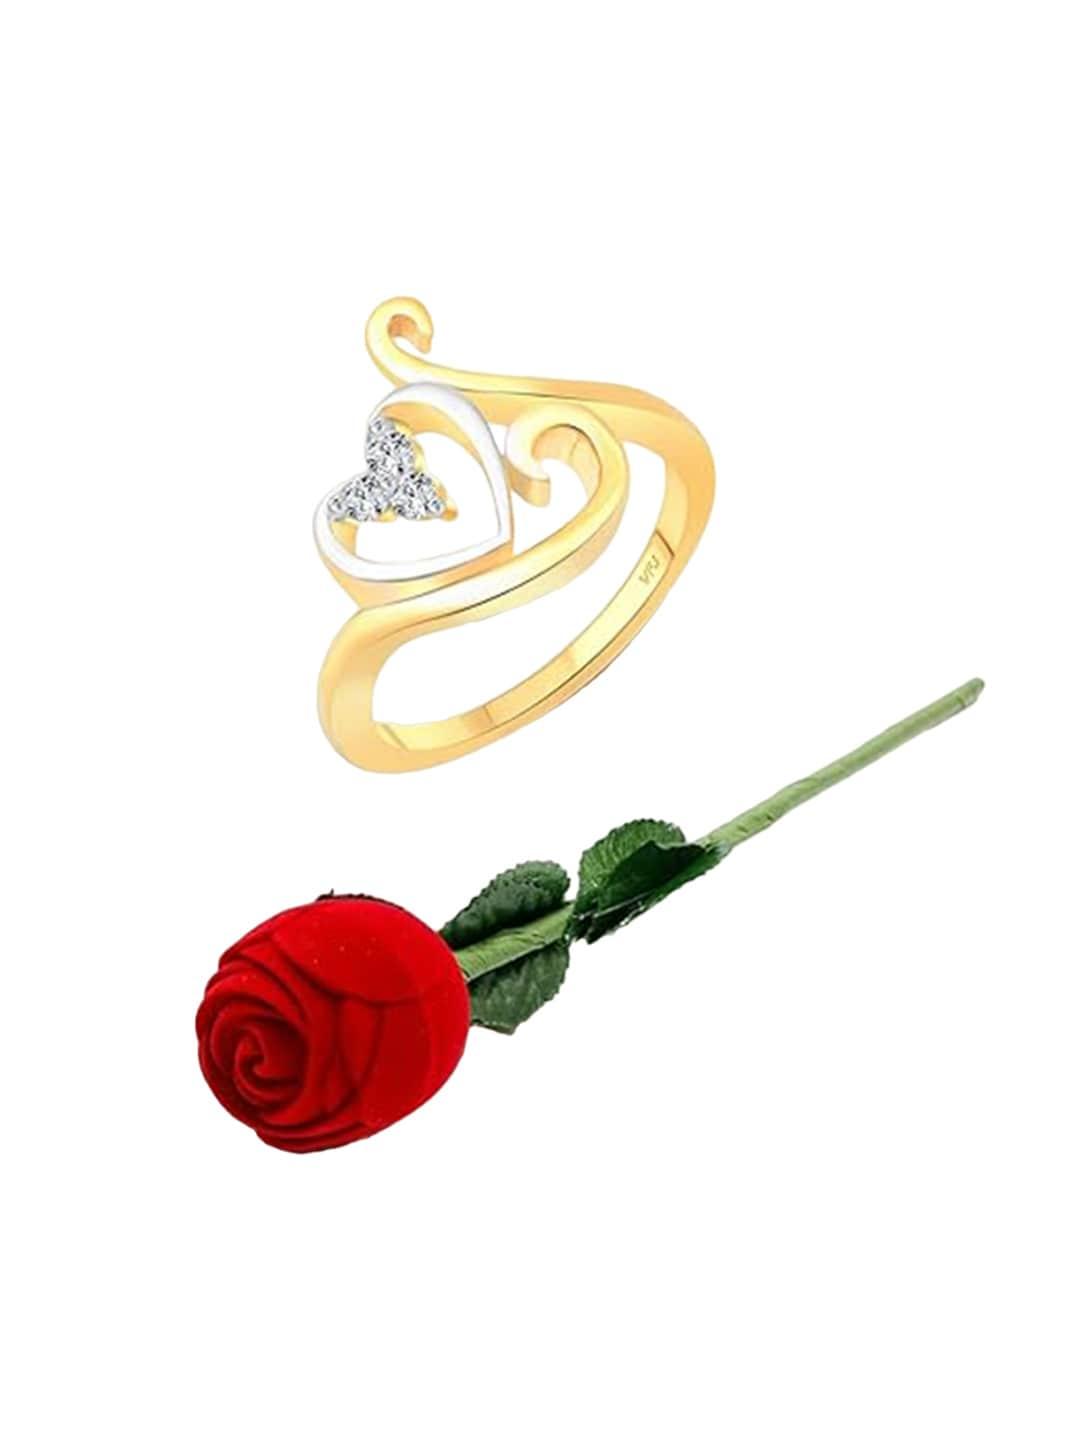 vighnaharta gold-plated cz-stone studded heart design finger ring with rose box